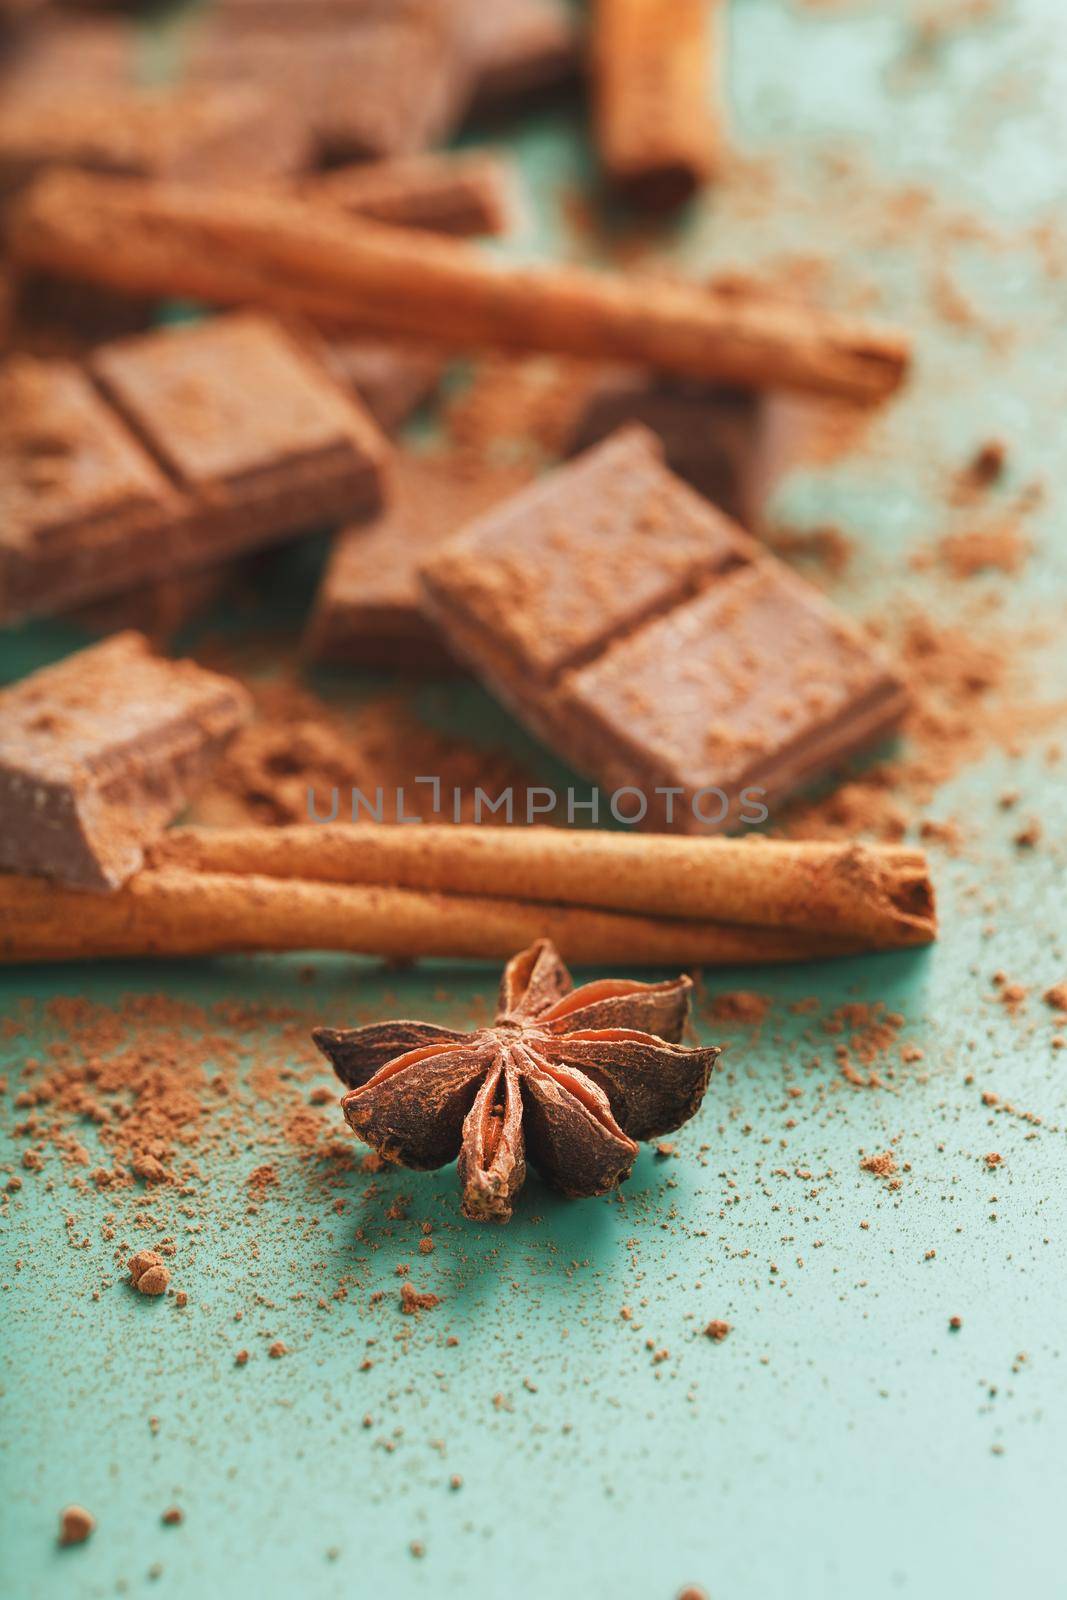 Chocolate broken into slices with cocoa powder and spices on a green background by AlexGrec